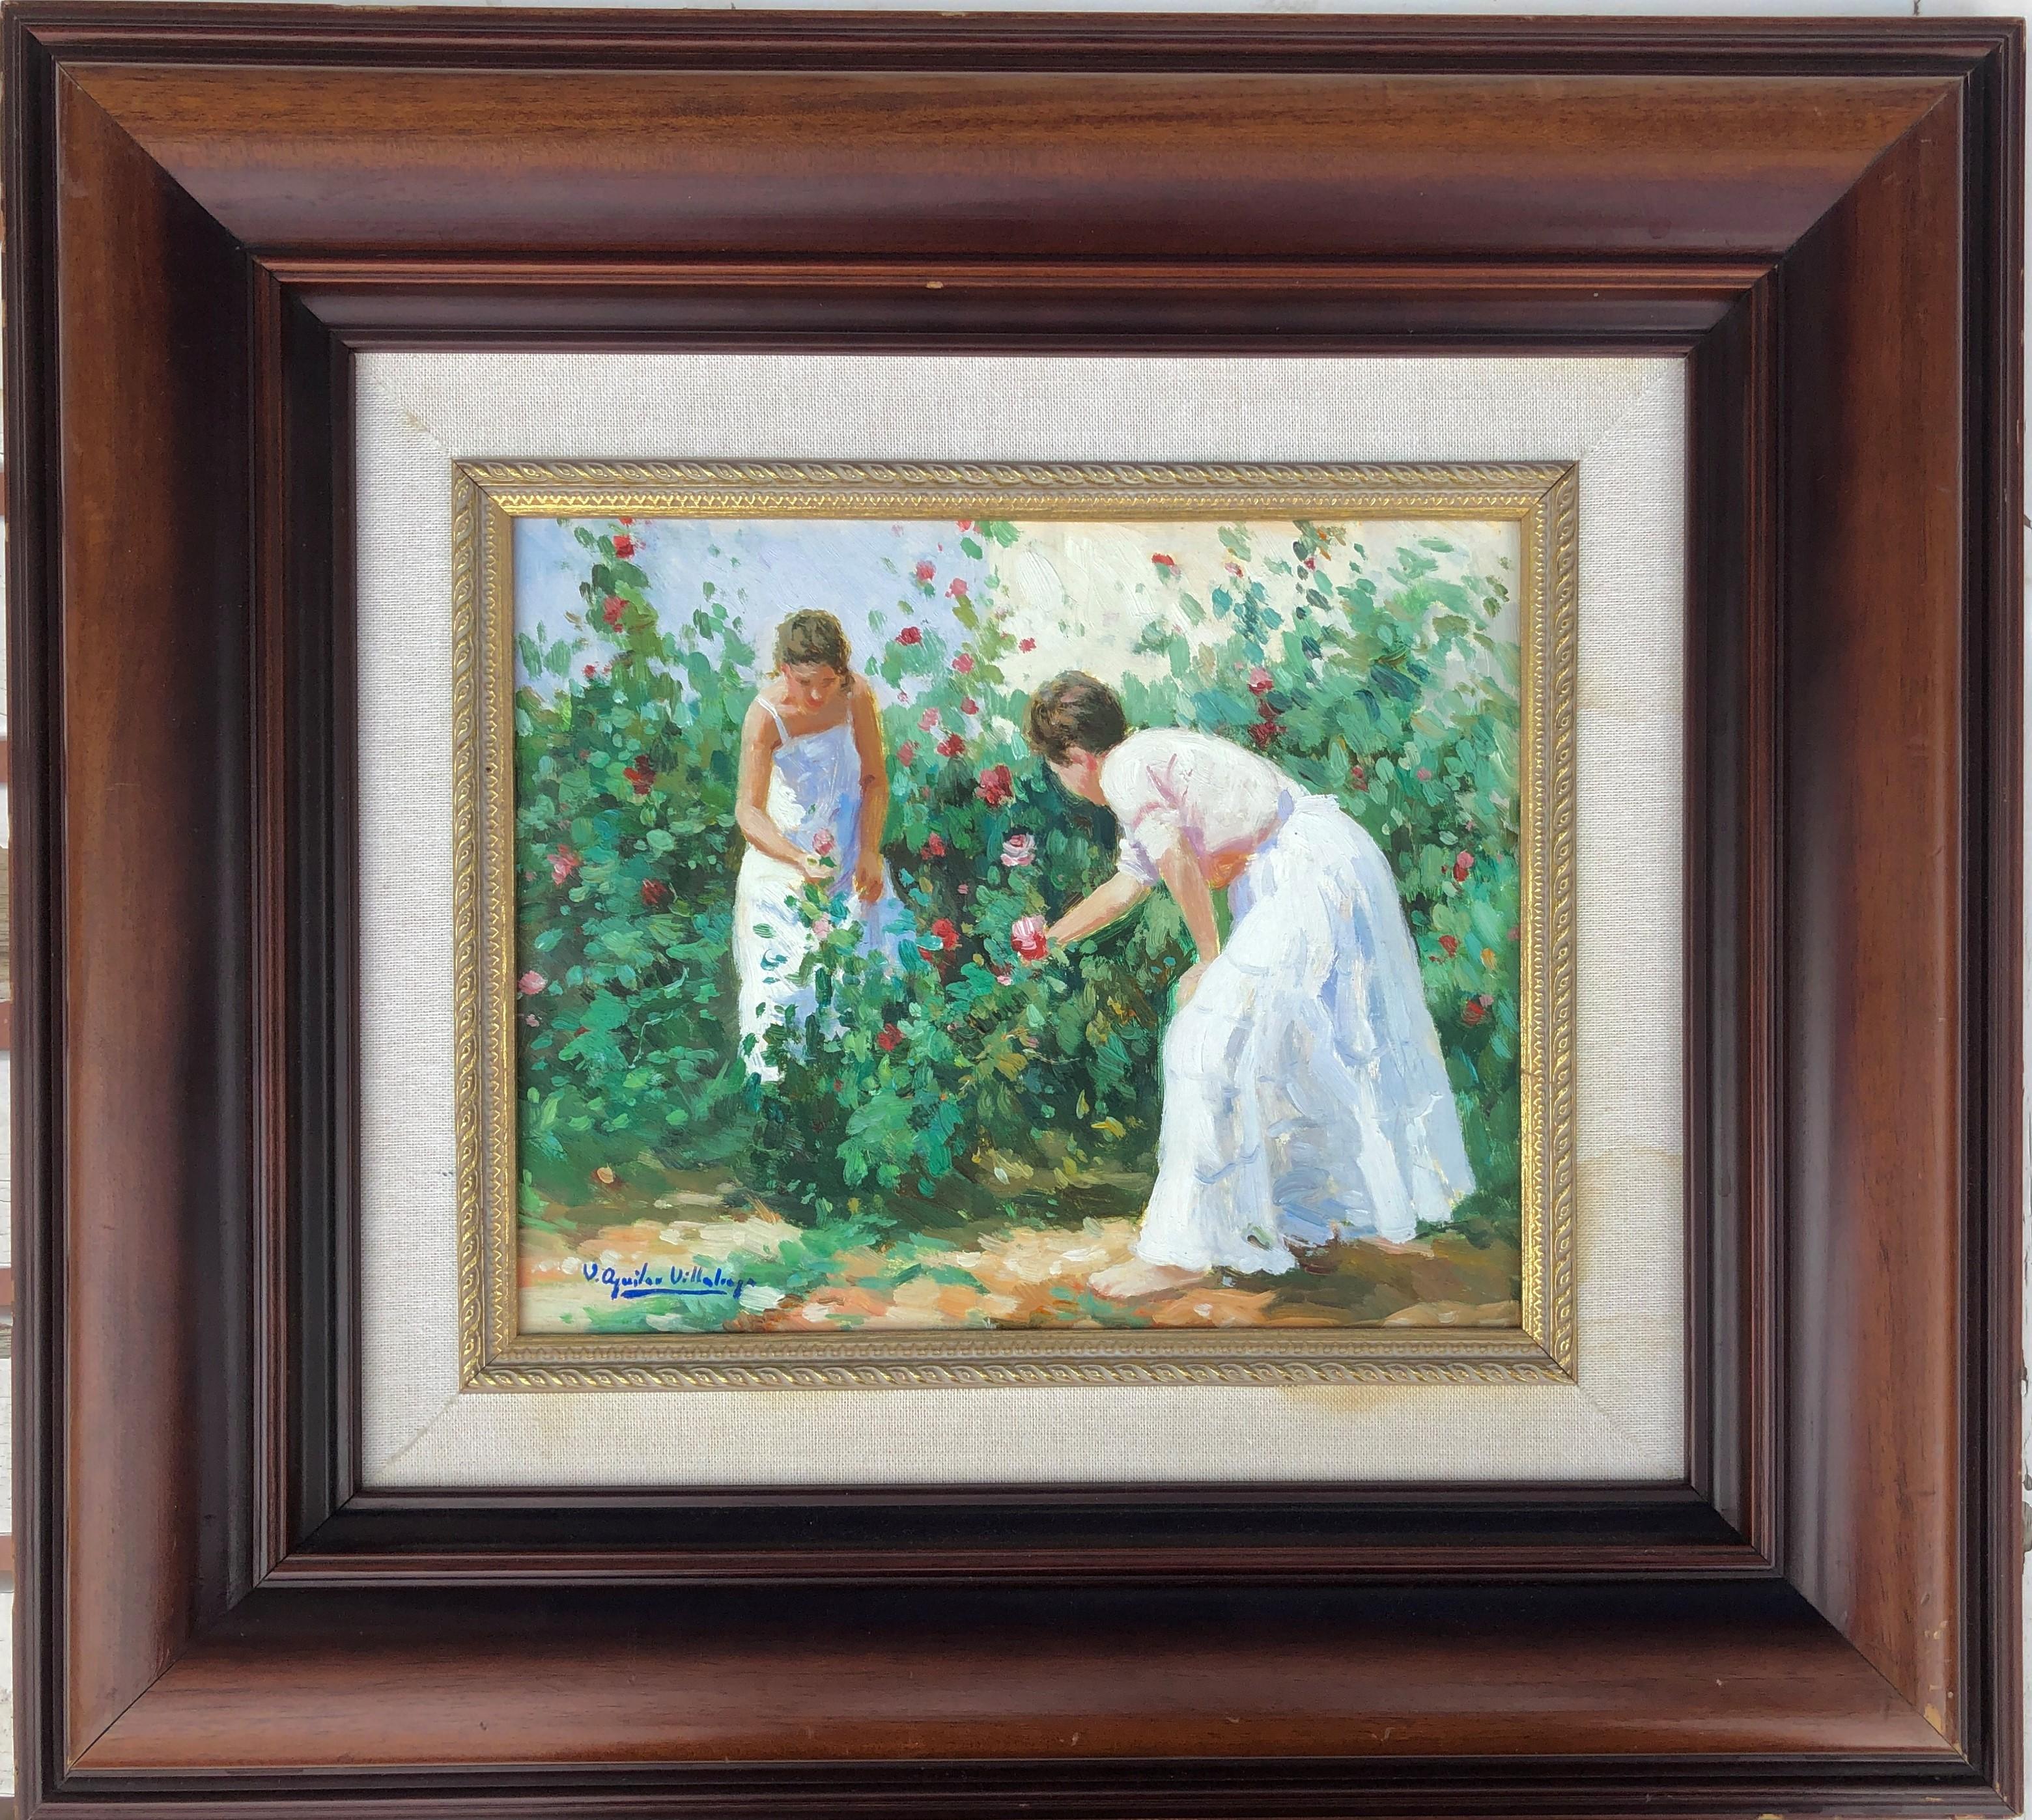 Garden with figures Mallorca oil on canvas painting - Painting by Vicente Aguilar Villalonga